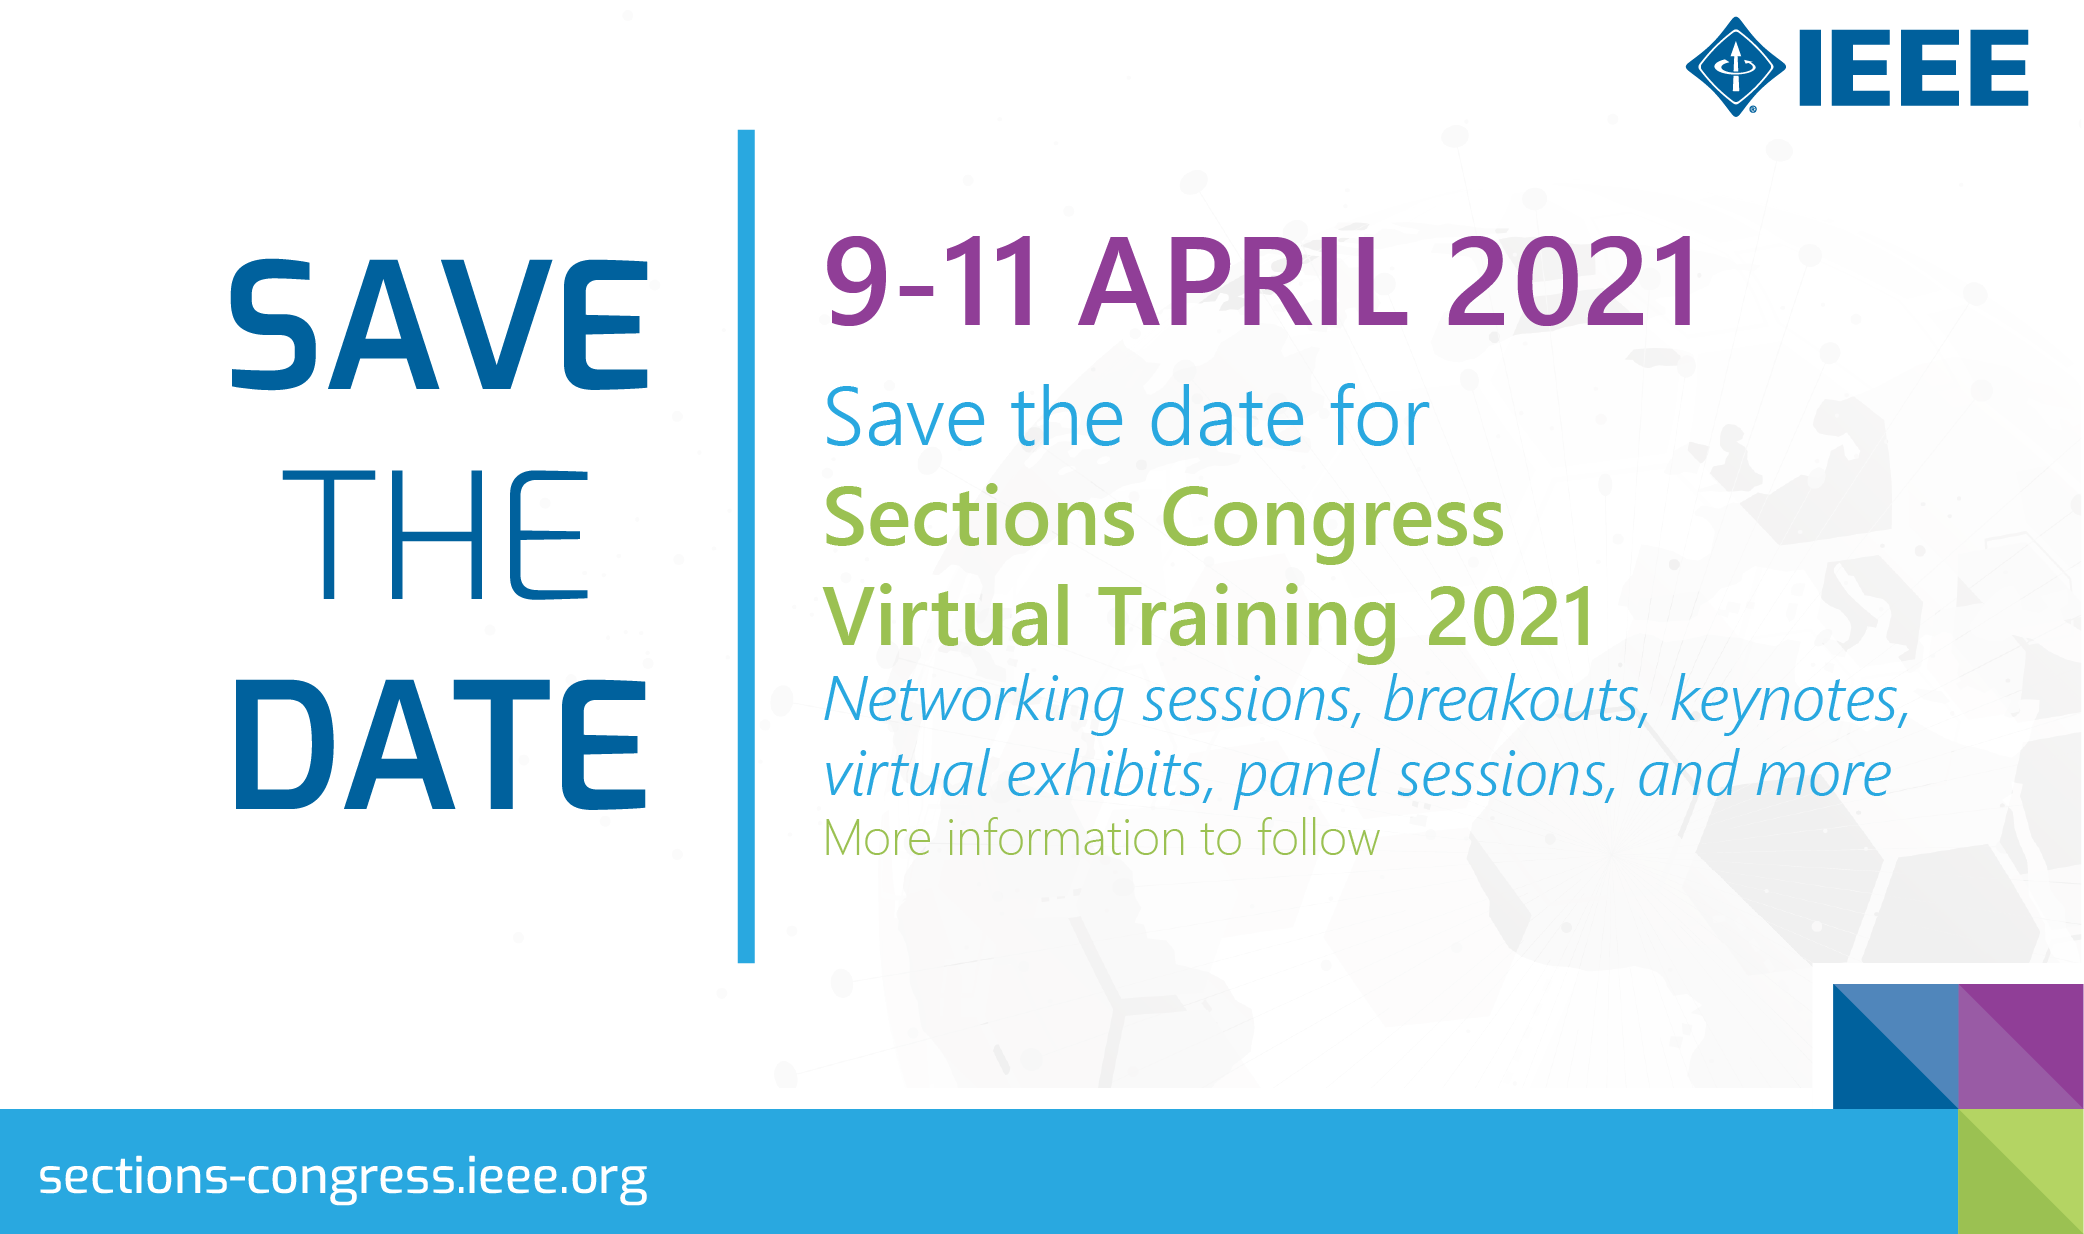 Save the Date - Sections Congress Virtual Training 2021